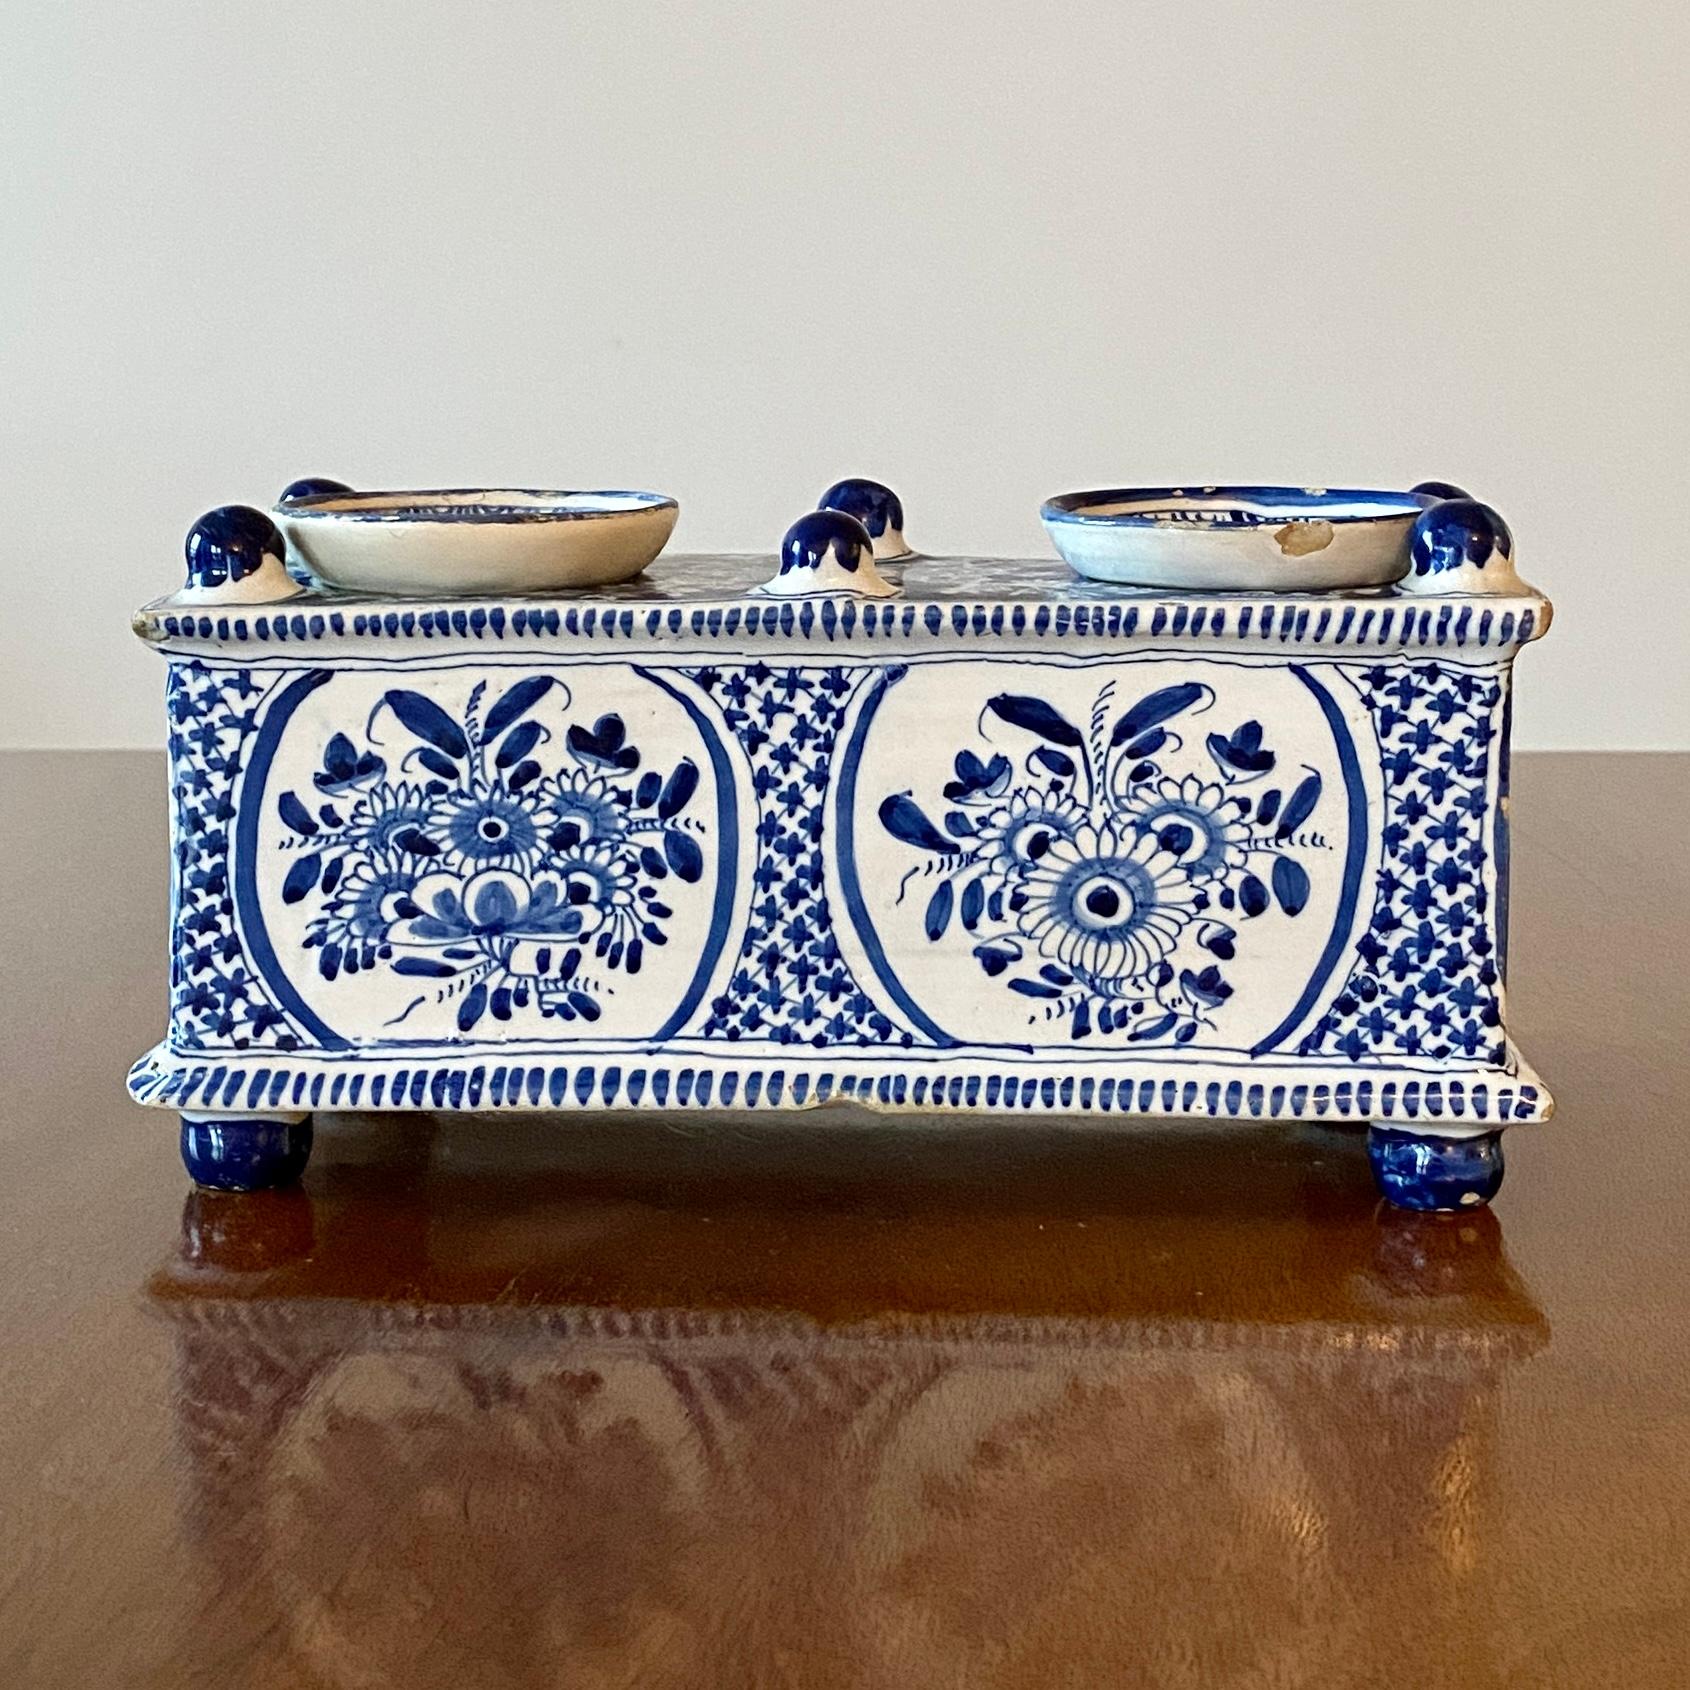 Danish 18th Century Blue Faience Inkwell by Store Kongensgade For Sale 8